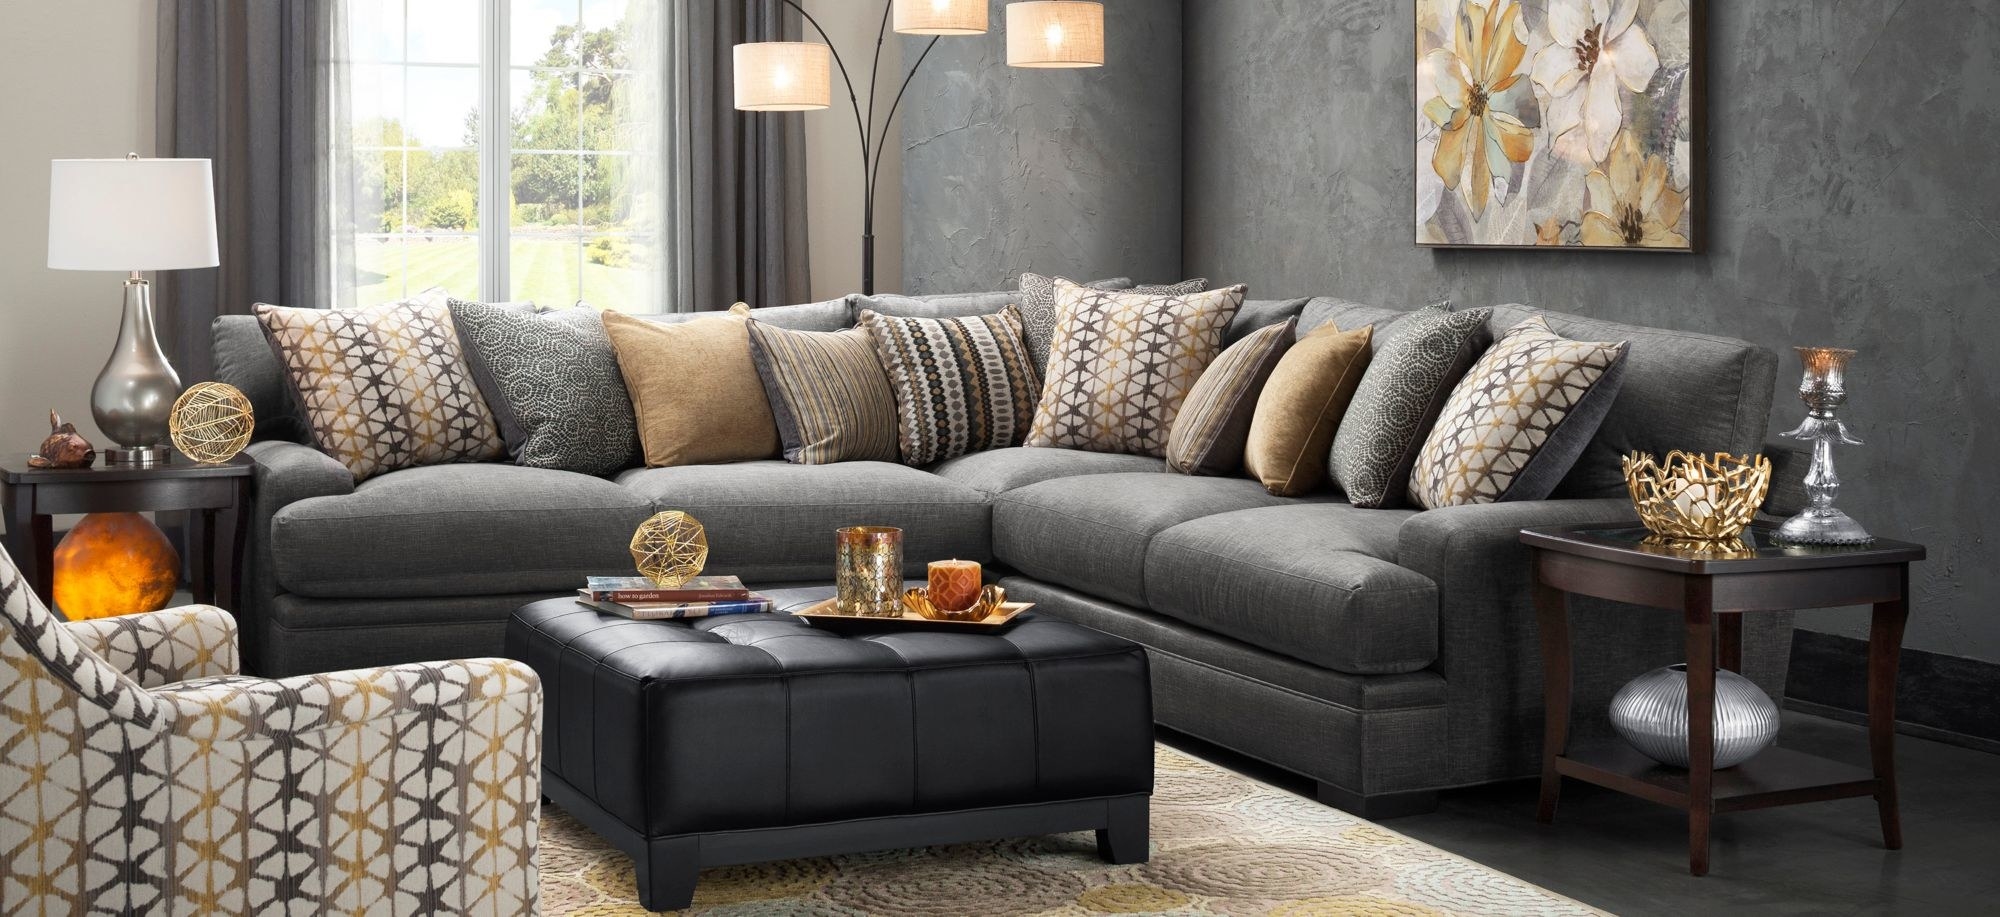 a gray sectional sofa with tons of throw pillows on it